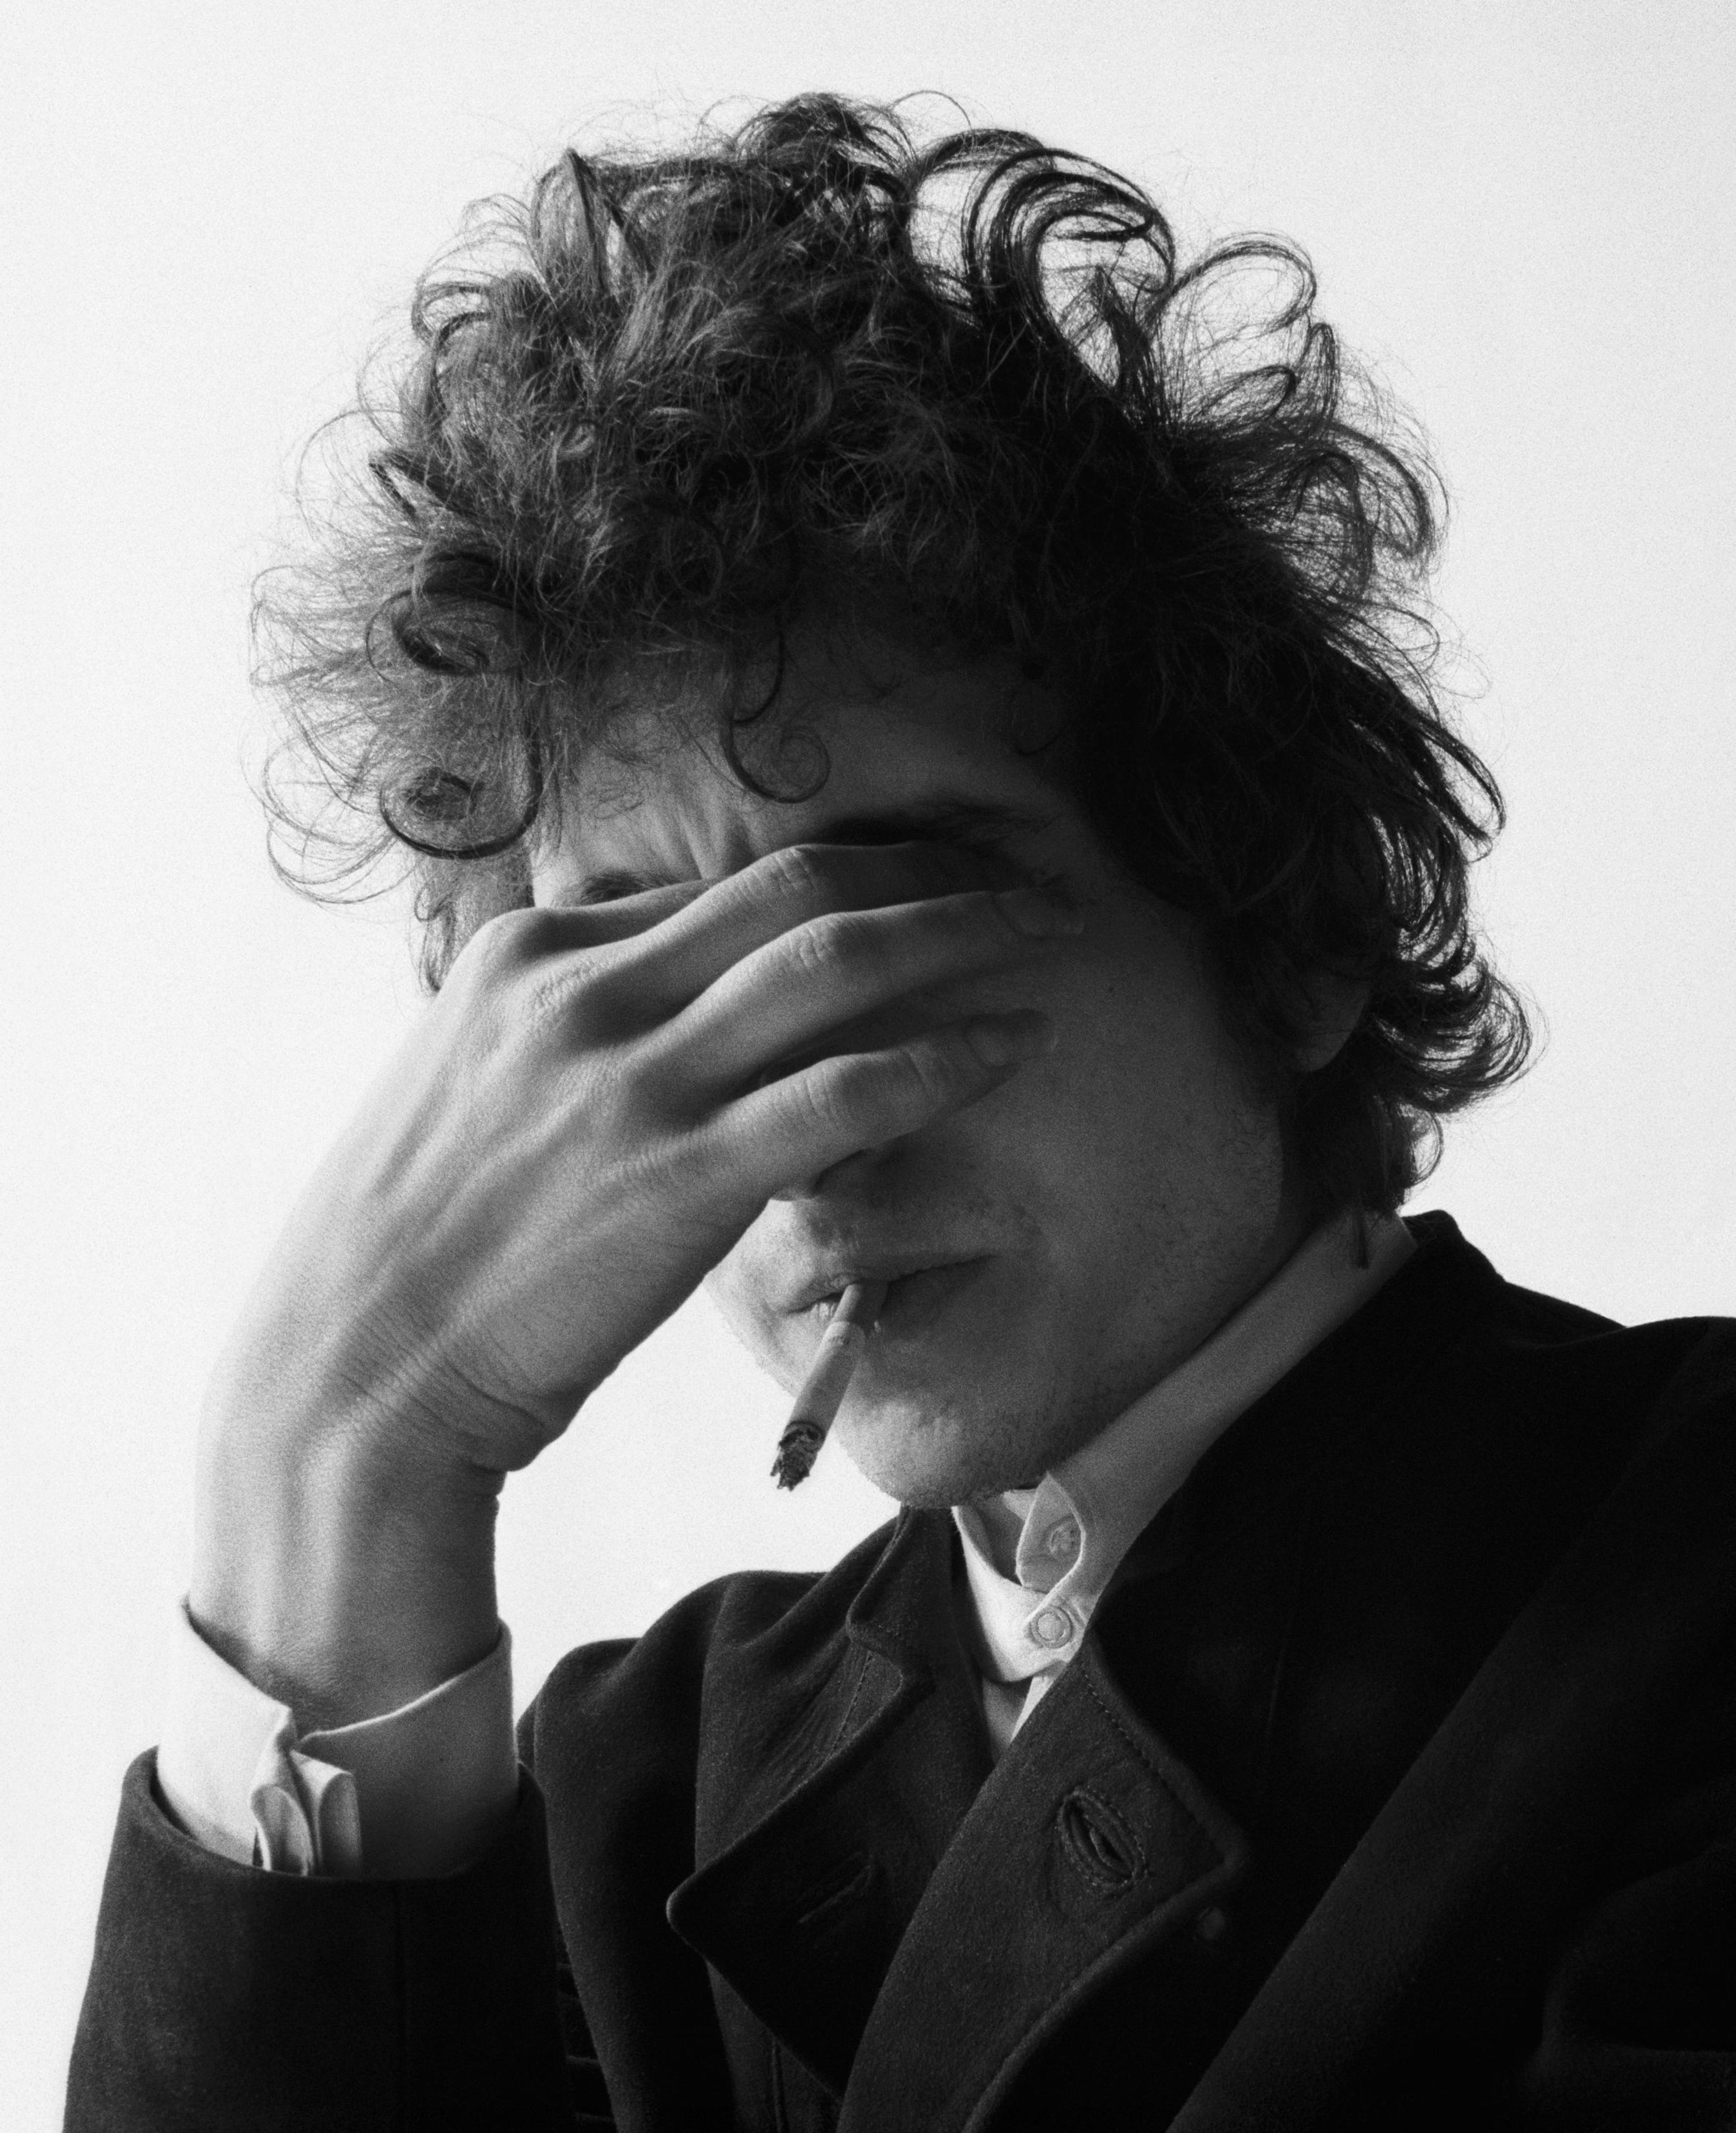 A black and white photograph of Bob Dylan covering his eyes with his hand